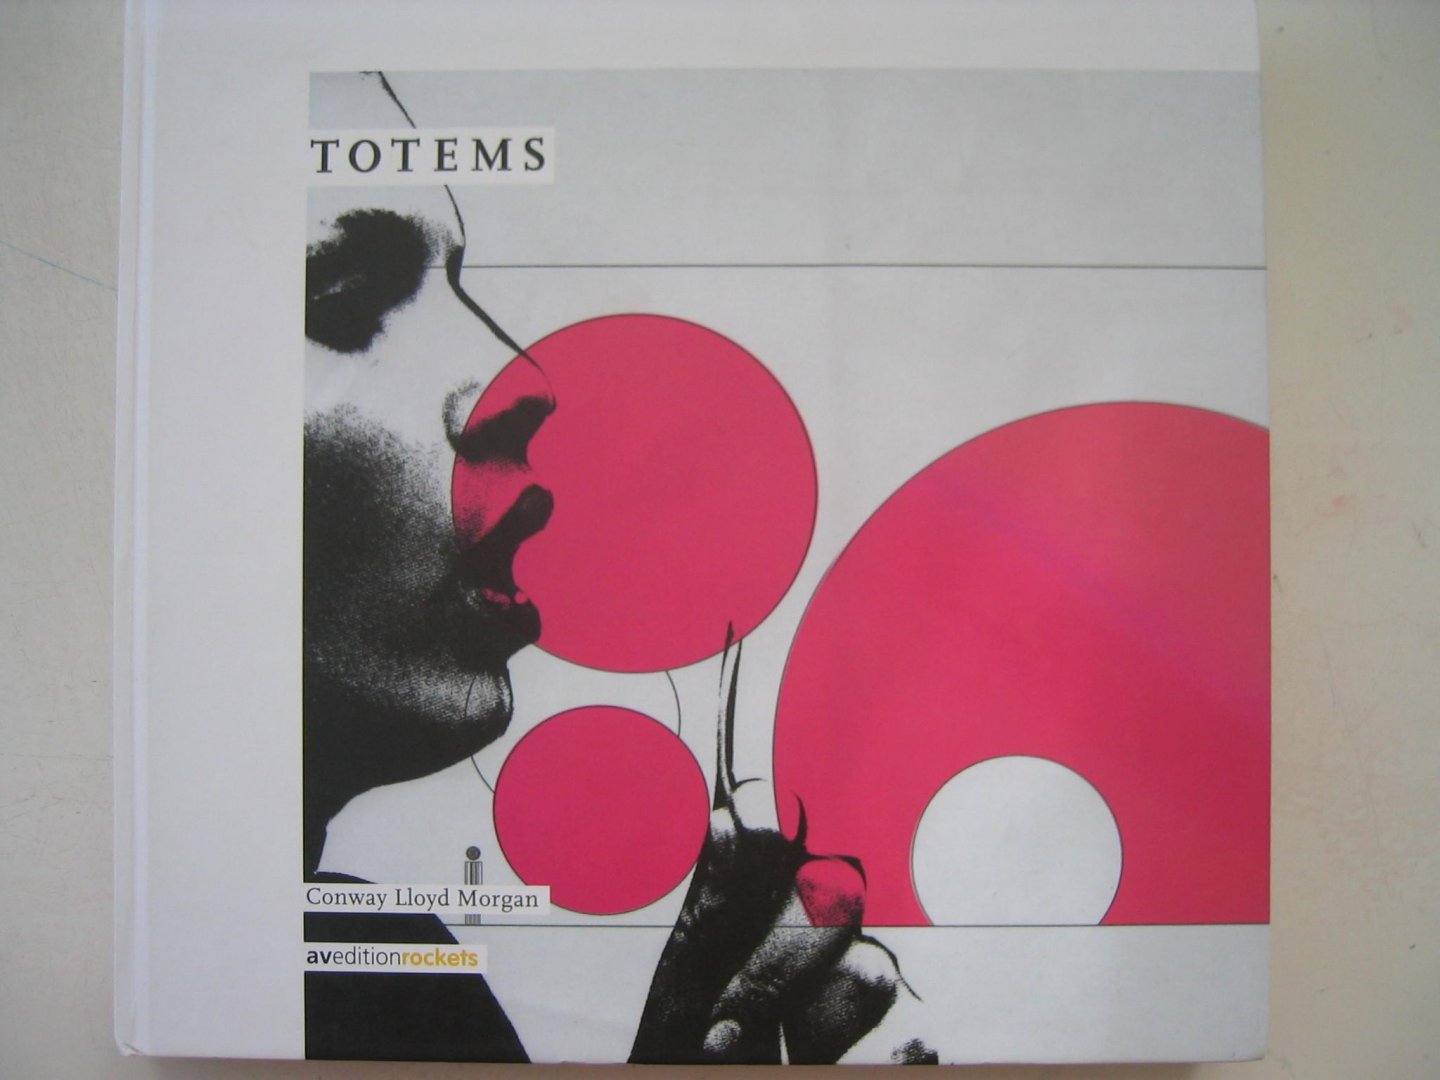 Morgan, Conway Lloyd - Totems - Communication & Architecture